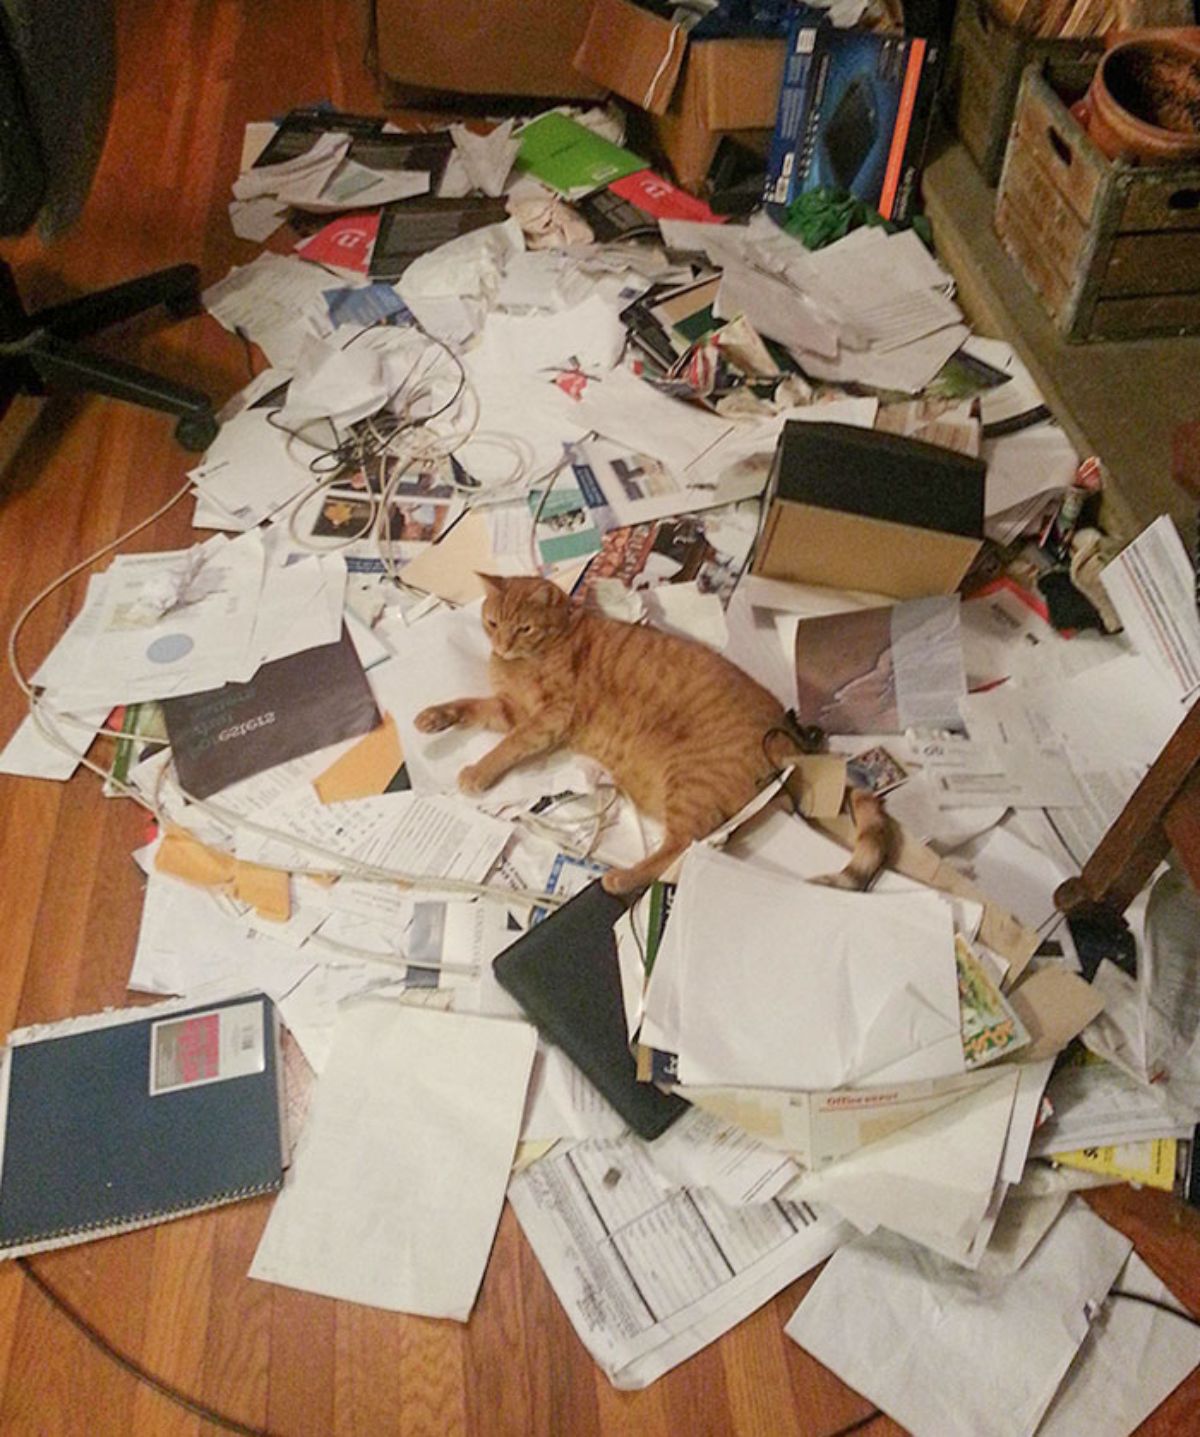 orange cat laying on a pile of files, papers and cables and a bunch of other things